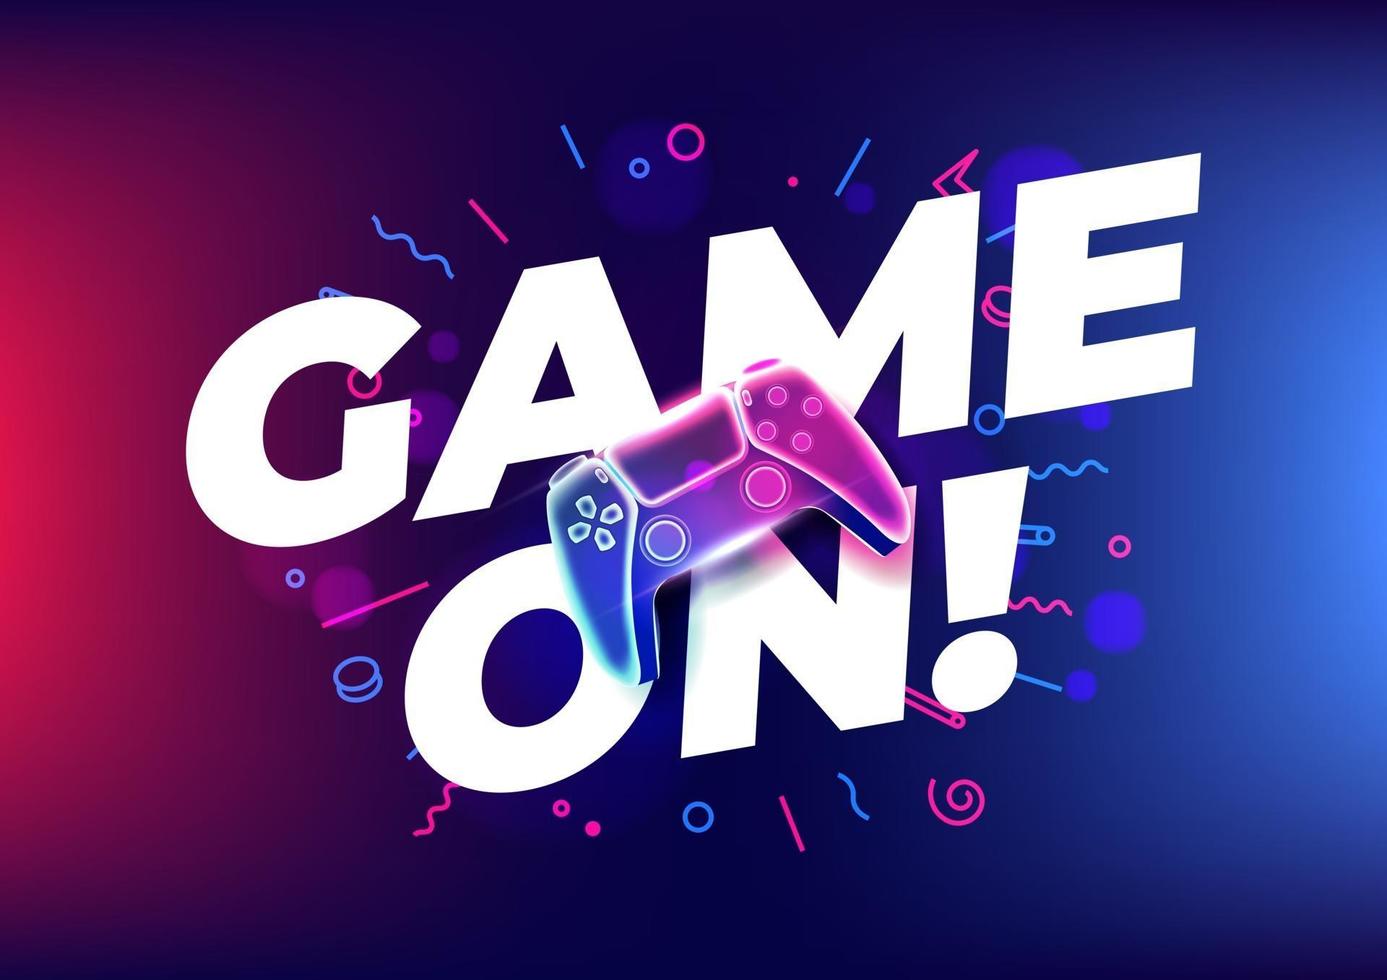 Game on Neon game controller or joystick for game console on blue background vector